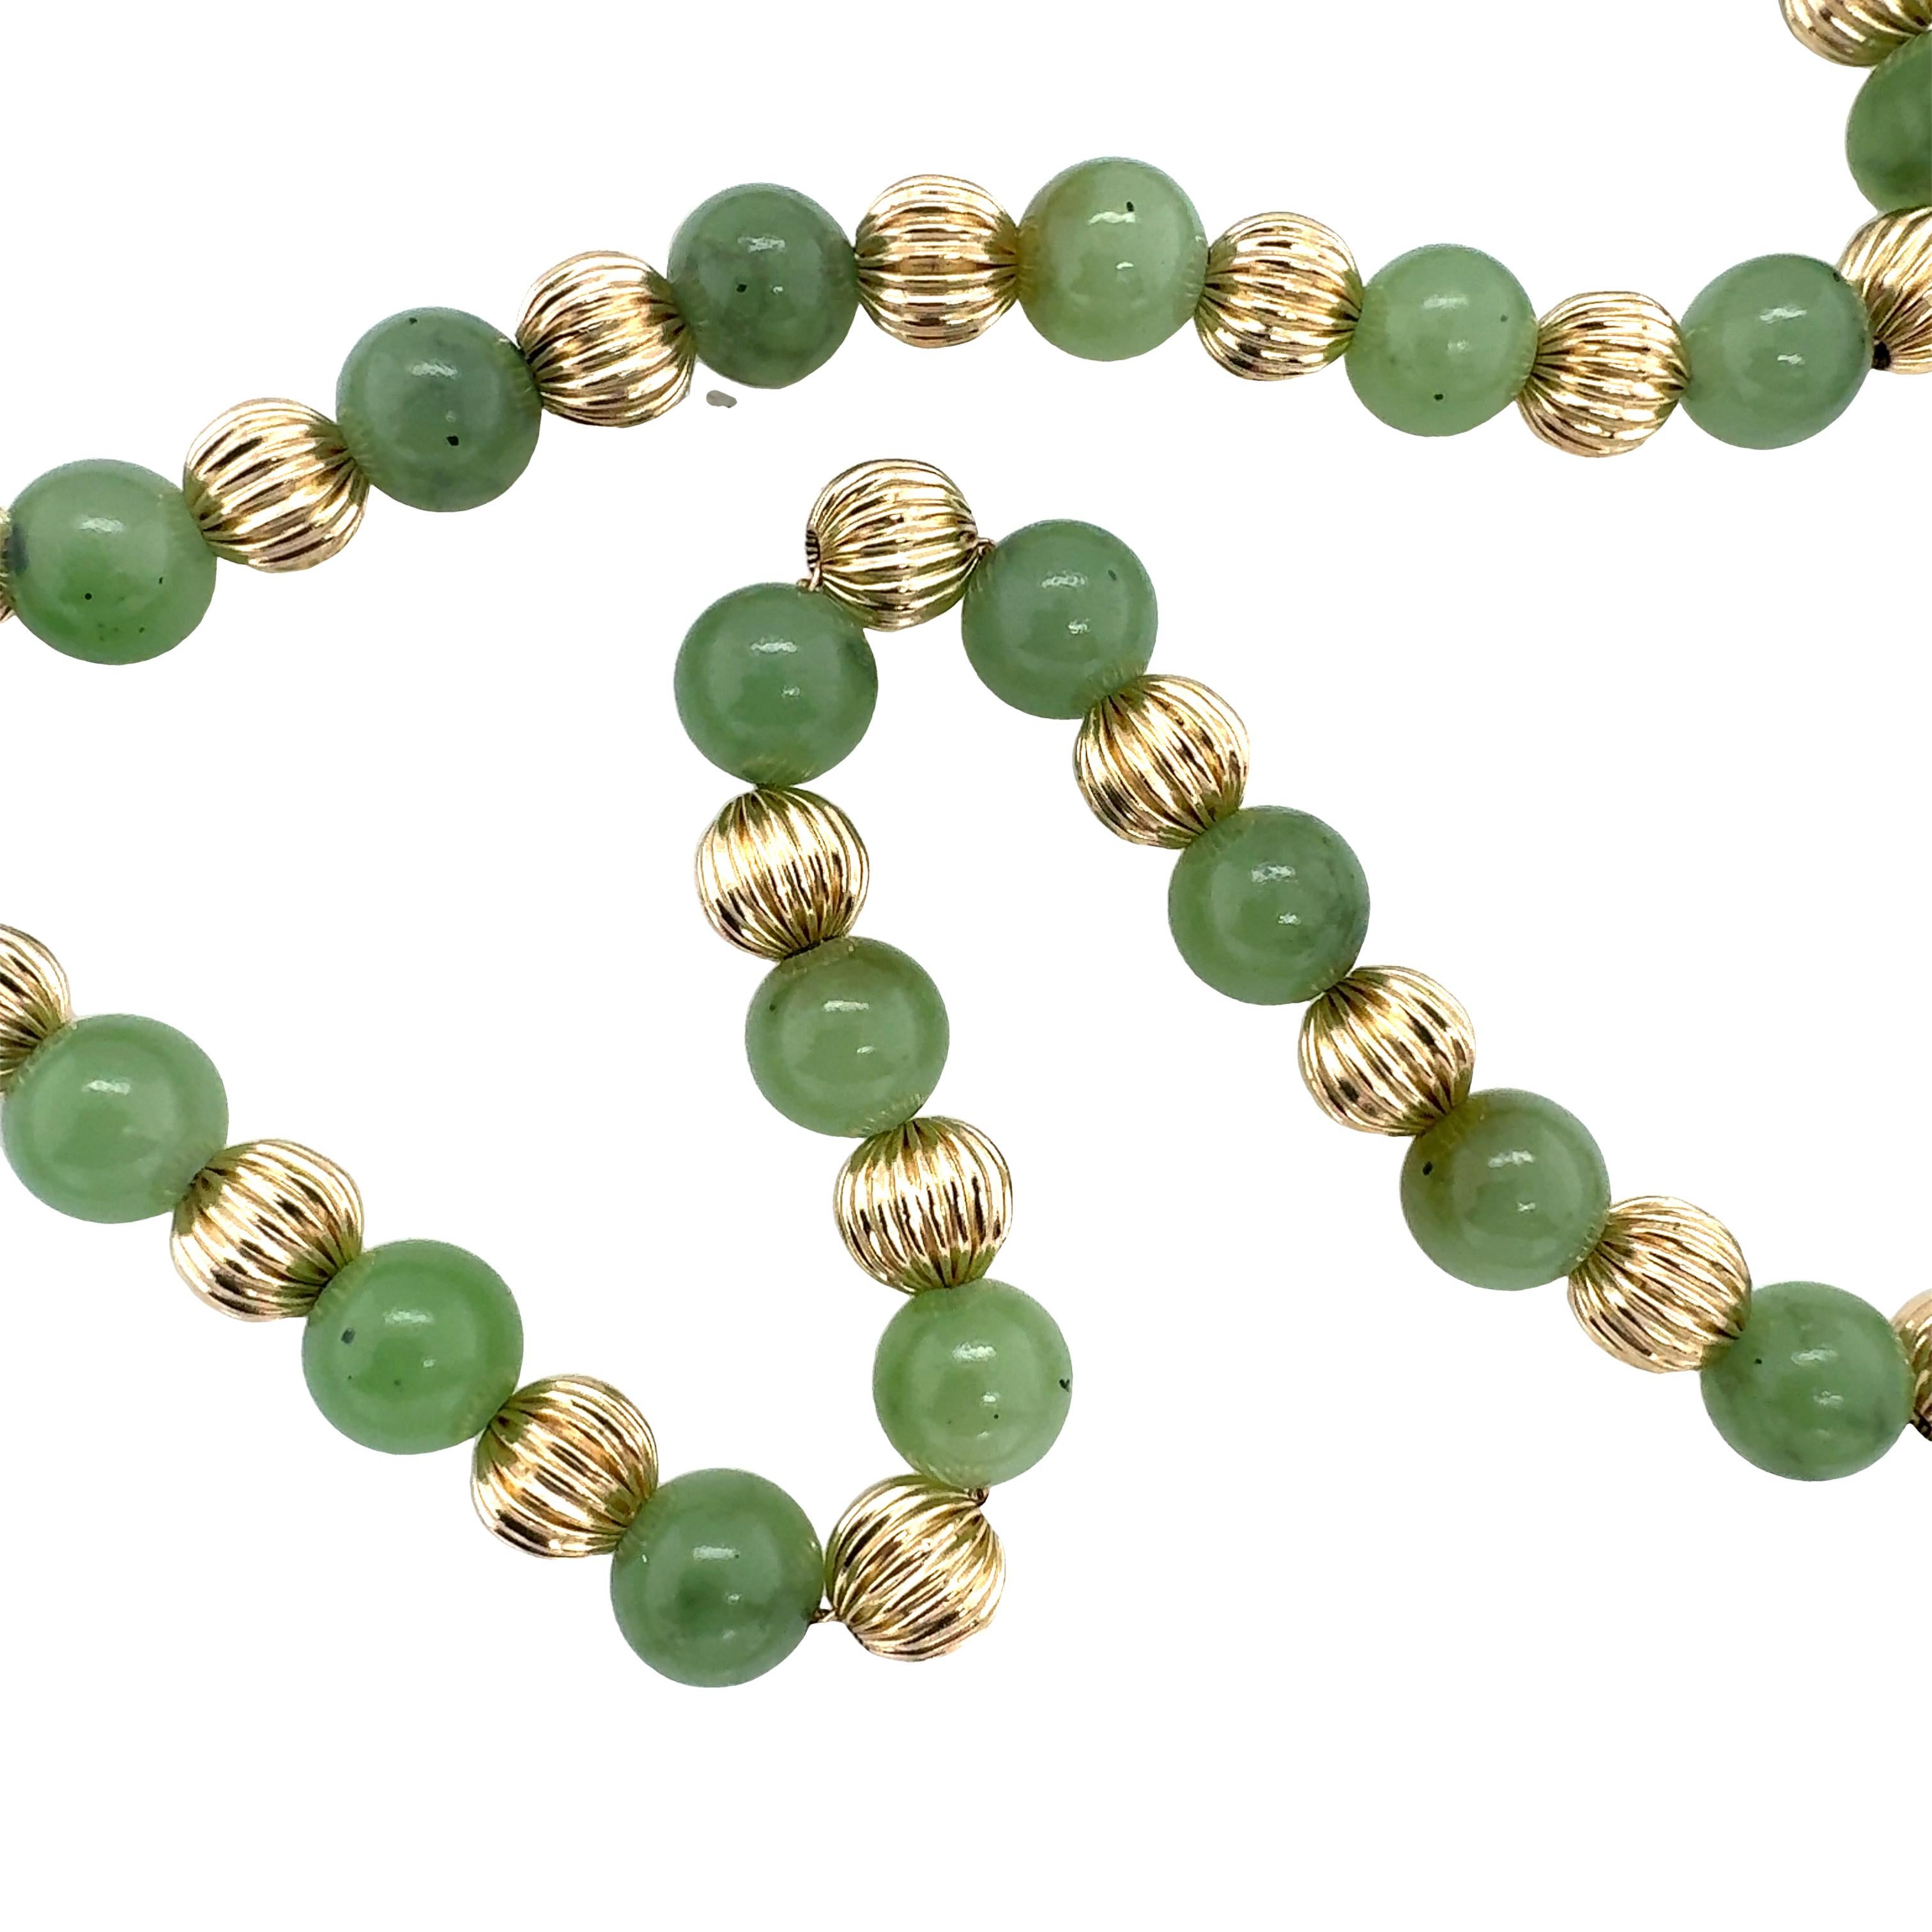 One 14K yellow gold bead and green jade bead necklace with alternating, interspaced beads.  With 57 ribbed gold beads measuring 7 millimeters in diameter on average and 57 green jade beads measuring 8 millimeters in diameter on average.

Metal: 14K